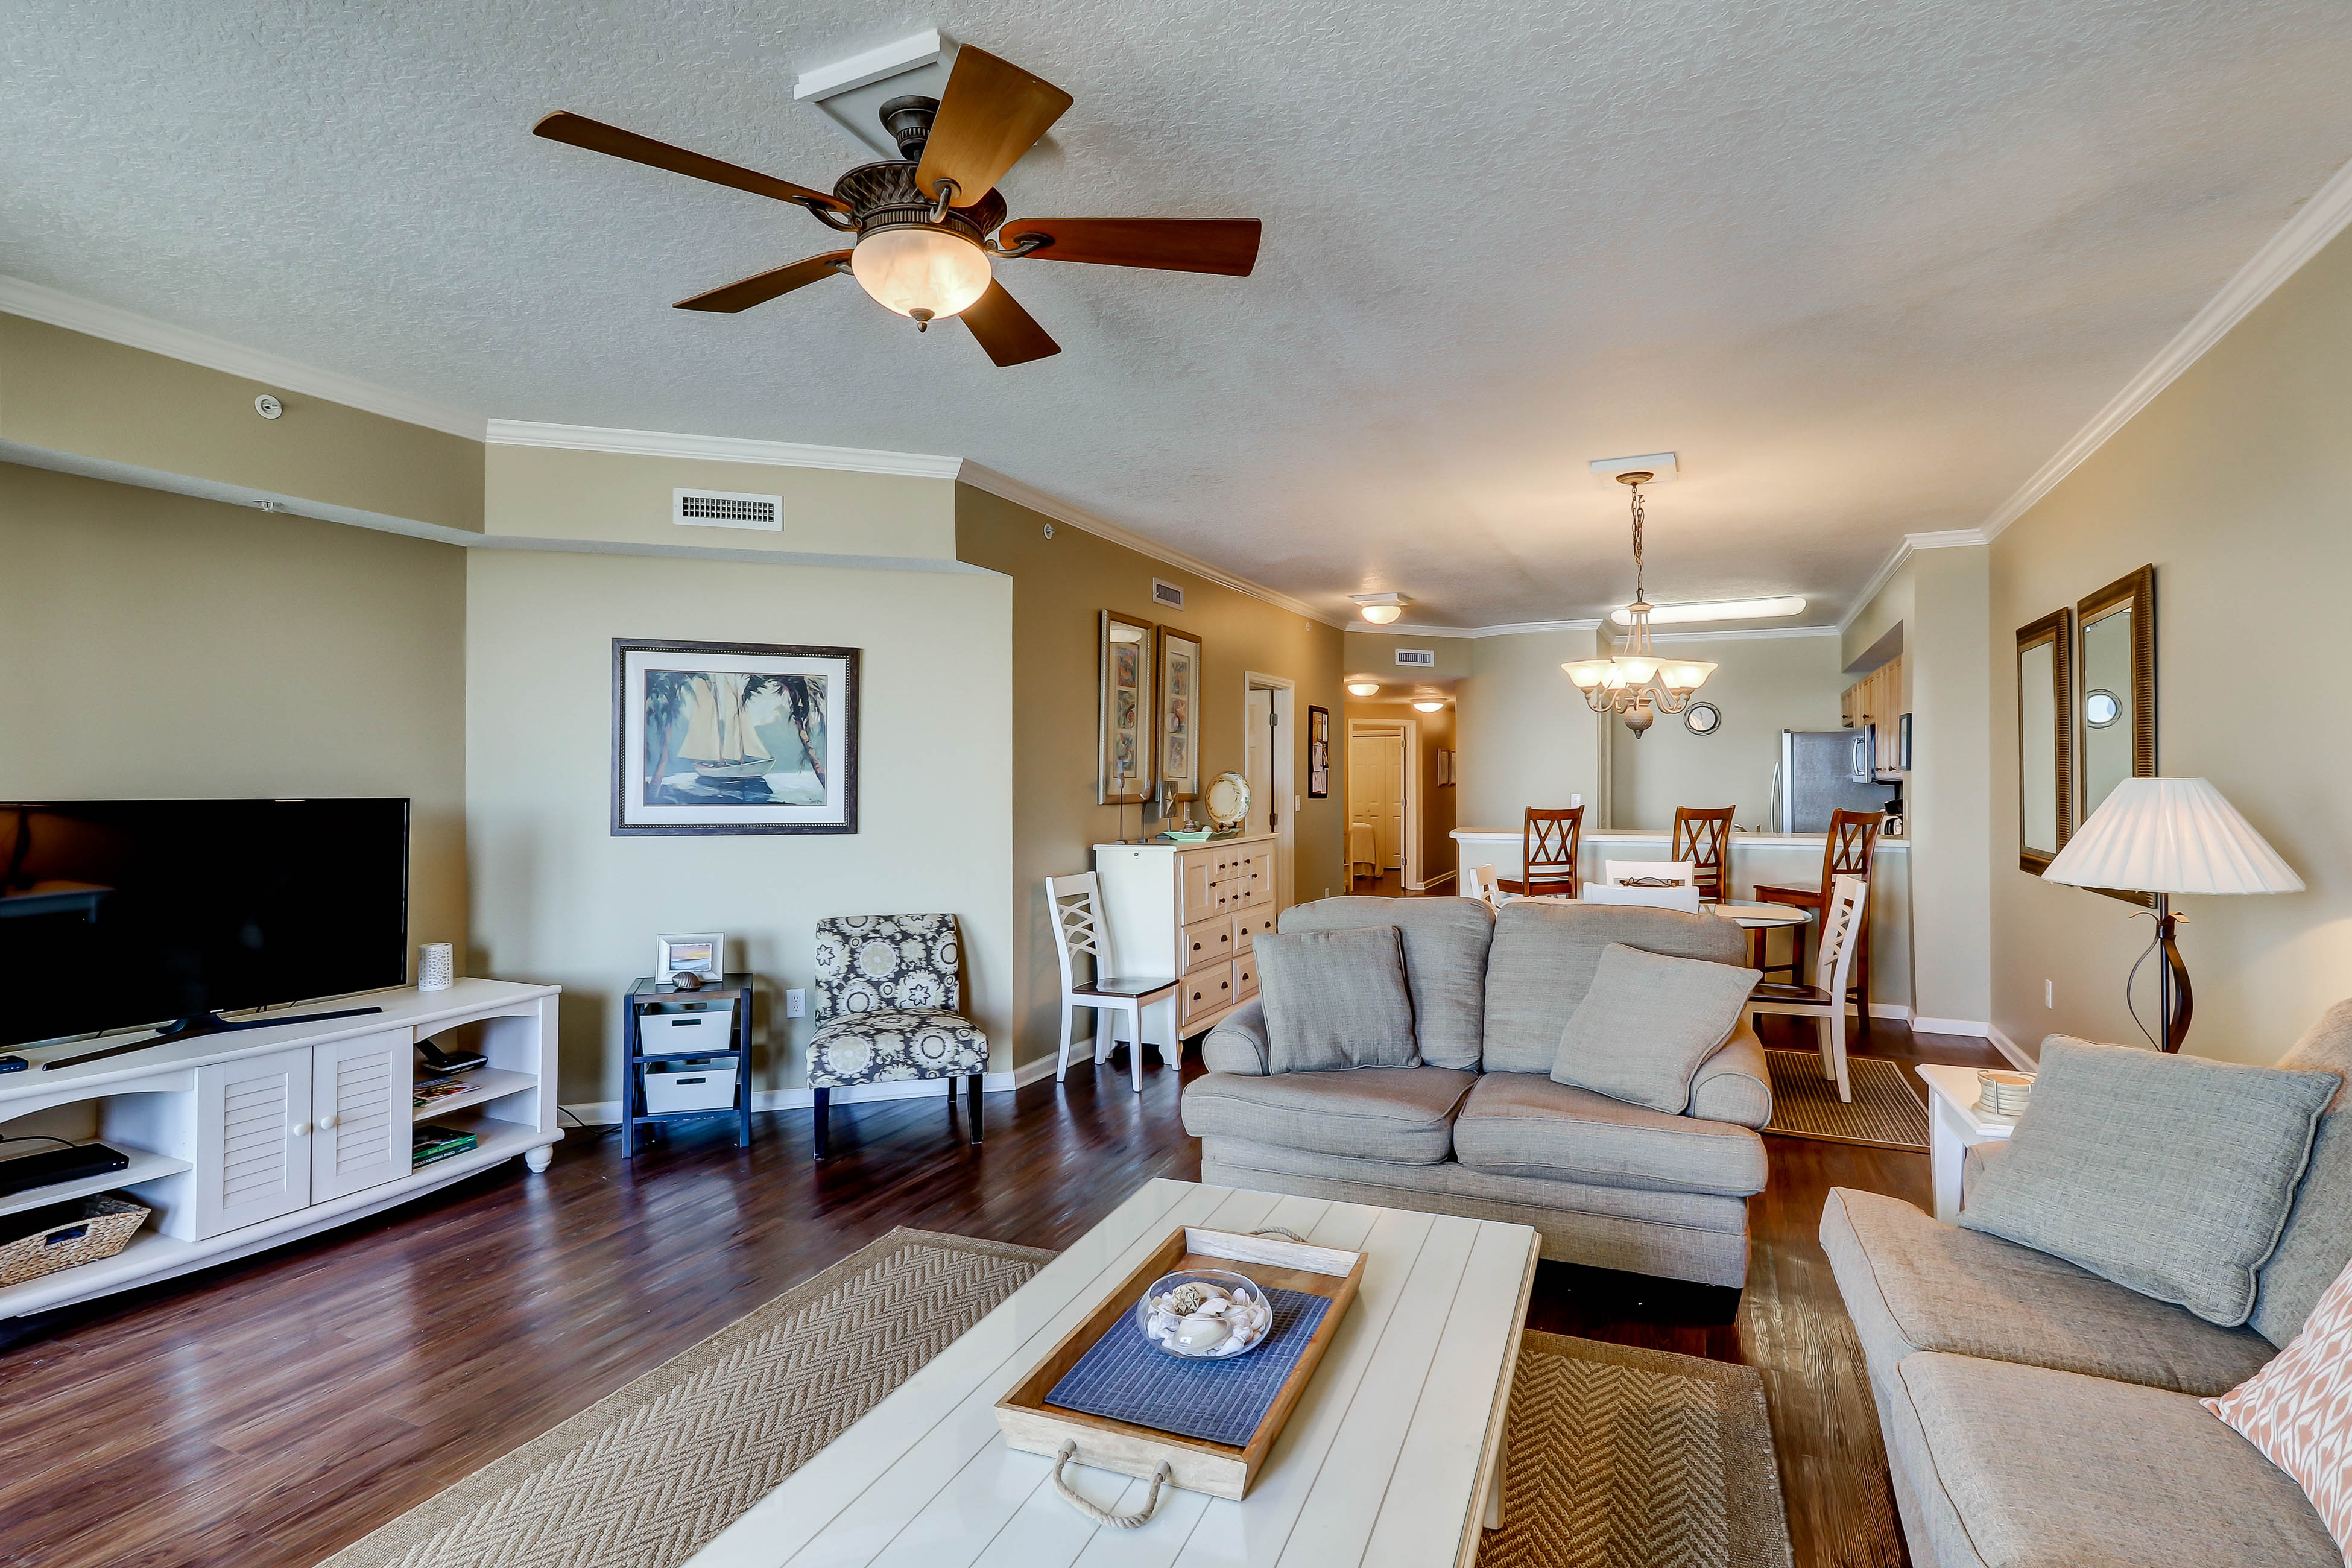 Dunes of Seagrove A307 Condo rental in Dunes of Seagrove in Highway 30-A Florida - #4